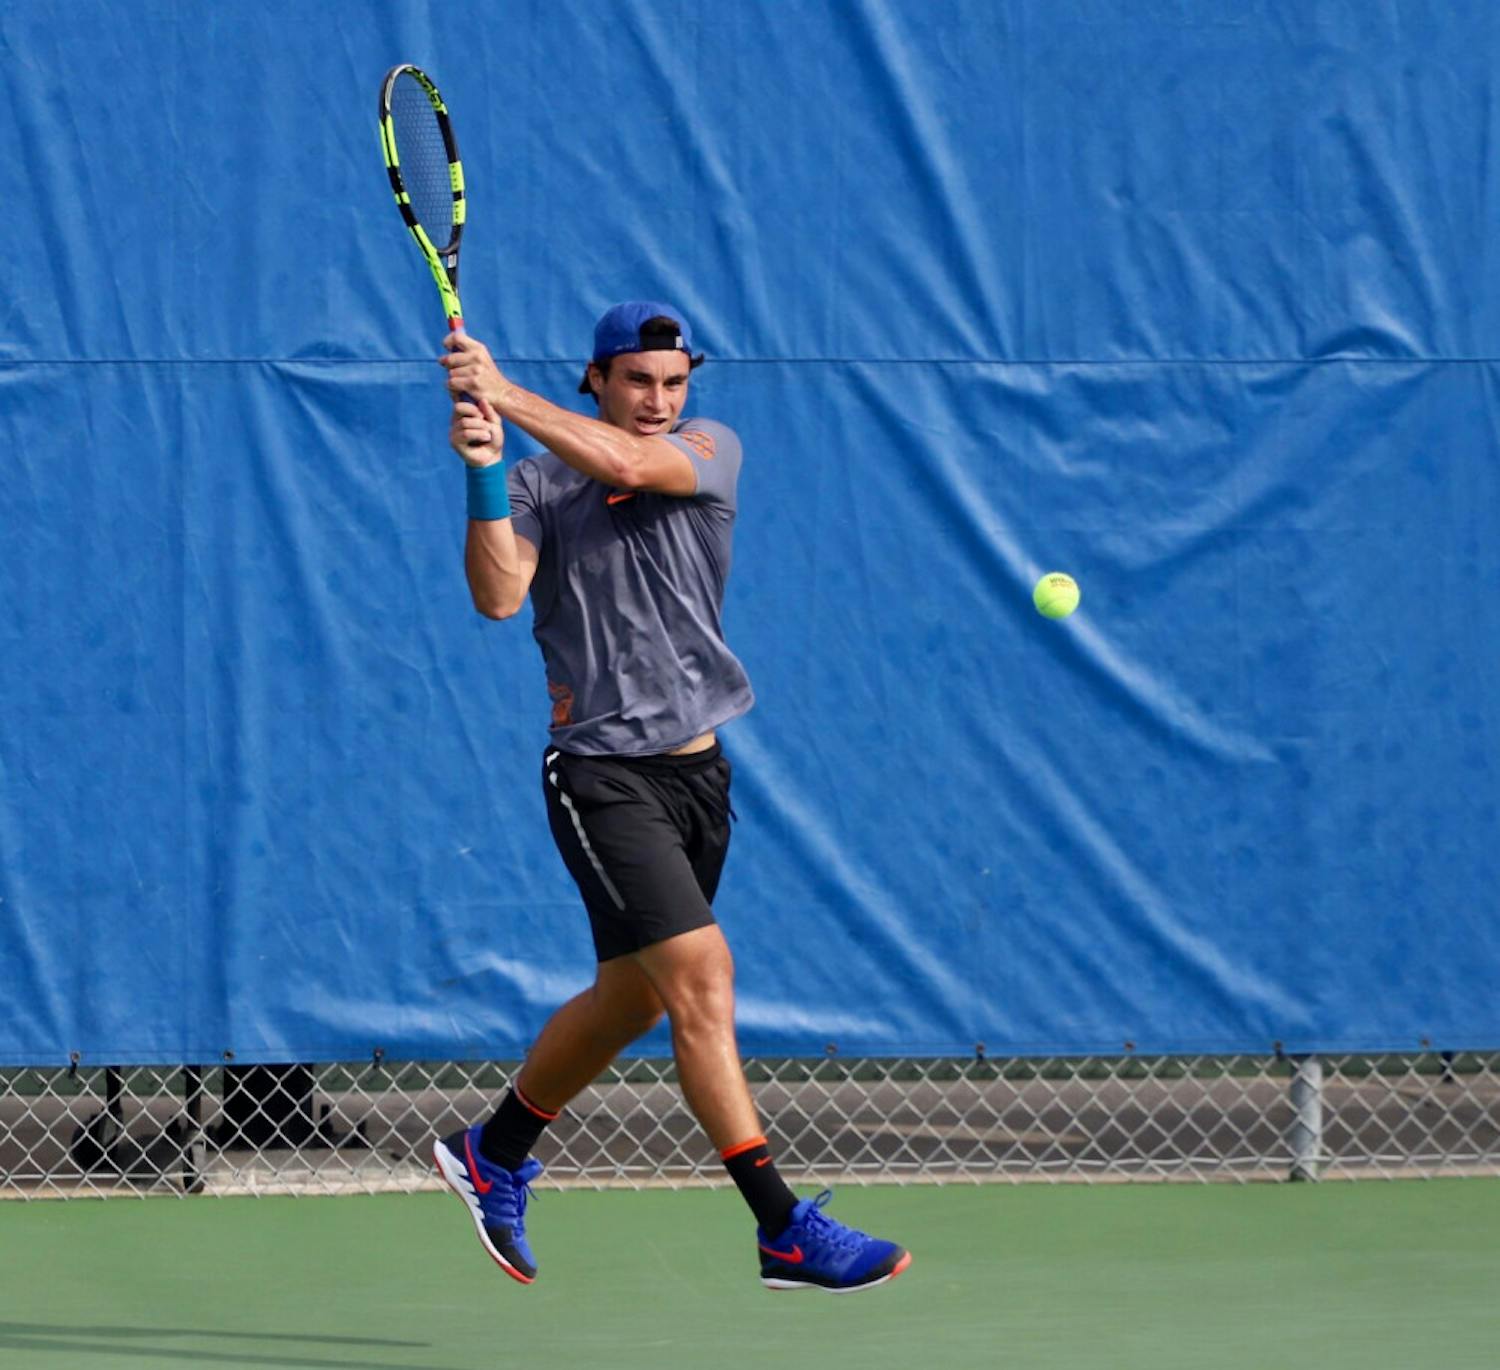 Senior Duarte Vale at day four of the ITA Tournament in Gainesville last year. He paired with Sam Riffice to earn a 6-4 doubles victory Friday.